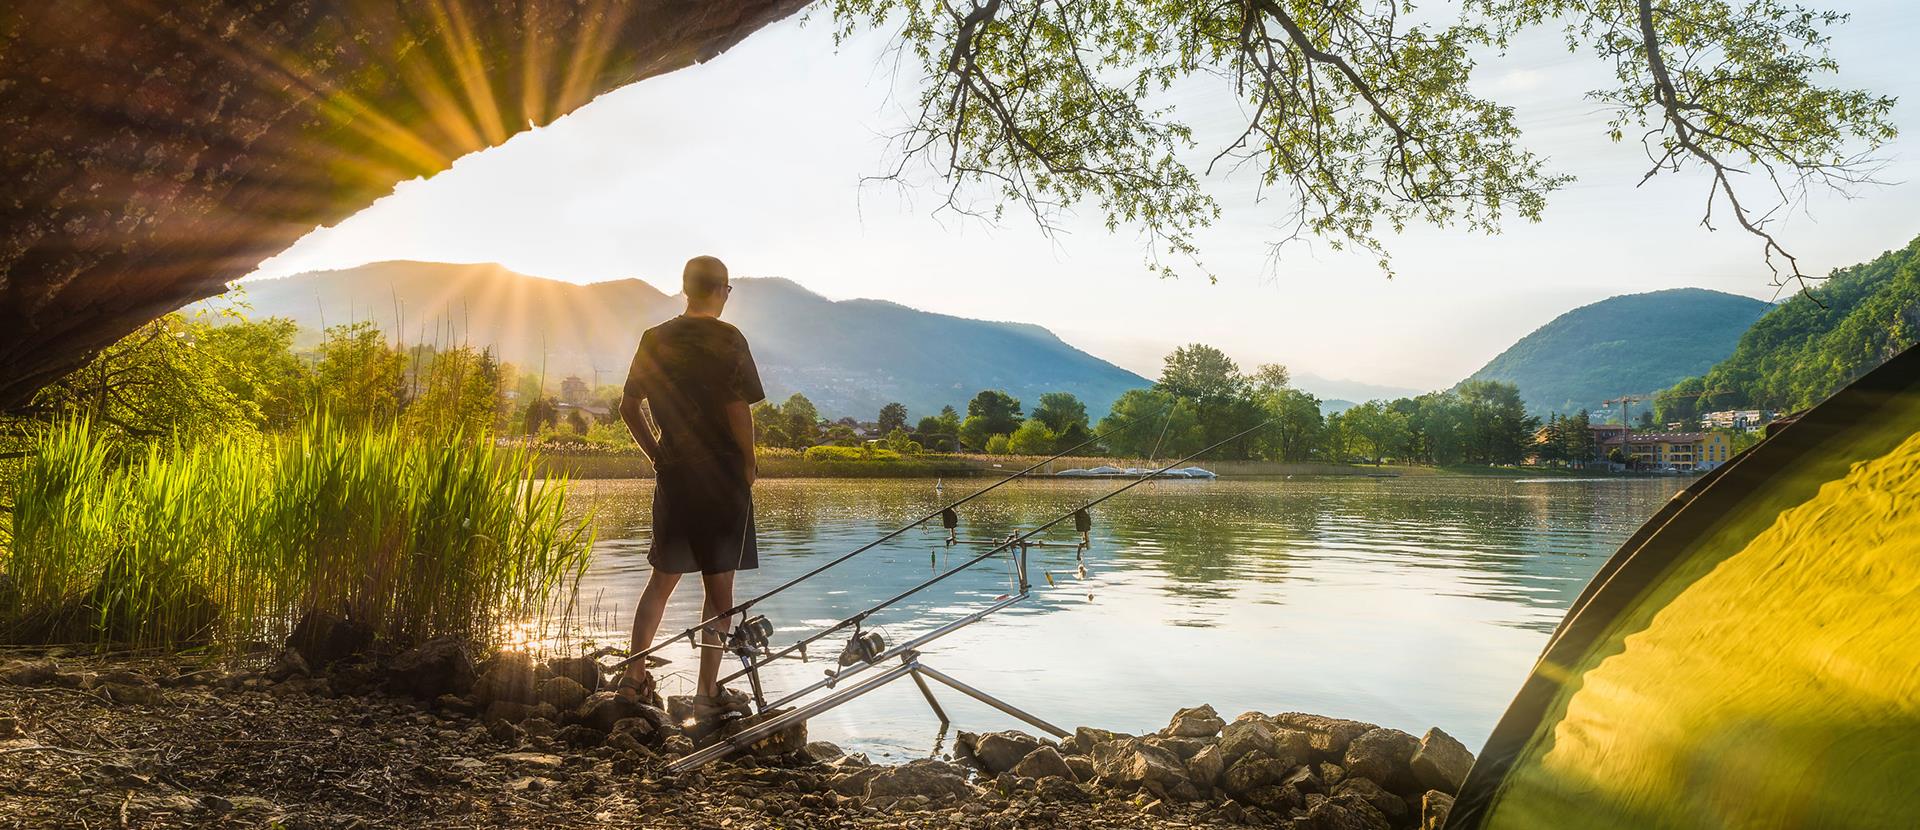 Fishing in Haute-Saône at the edge of the pond